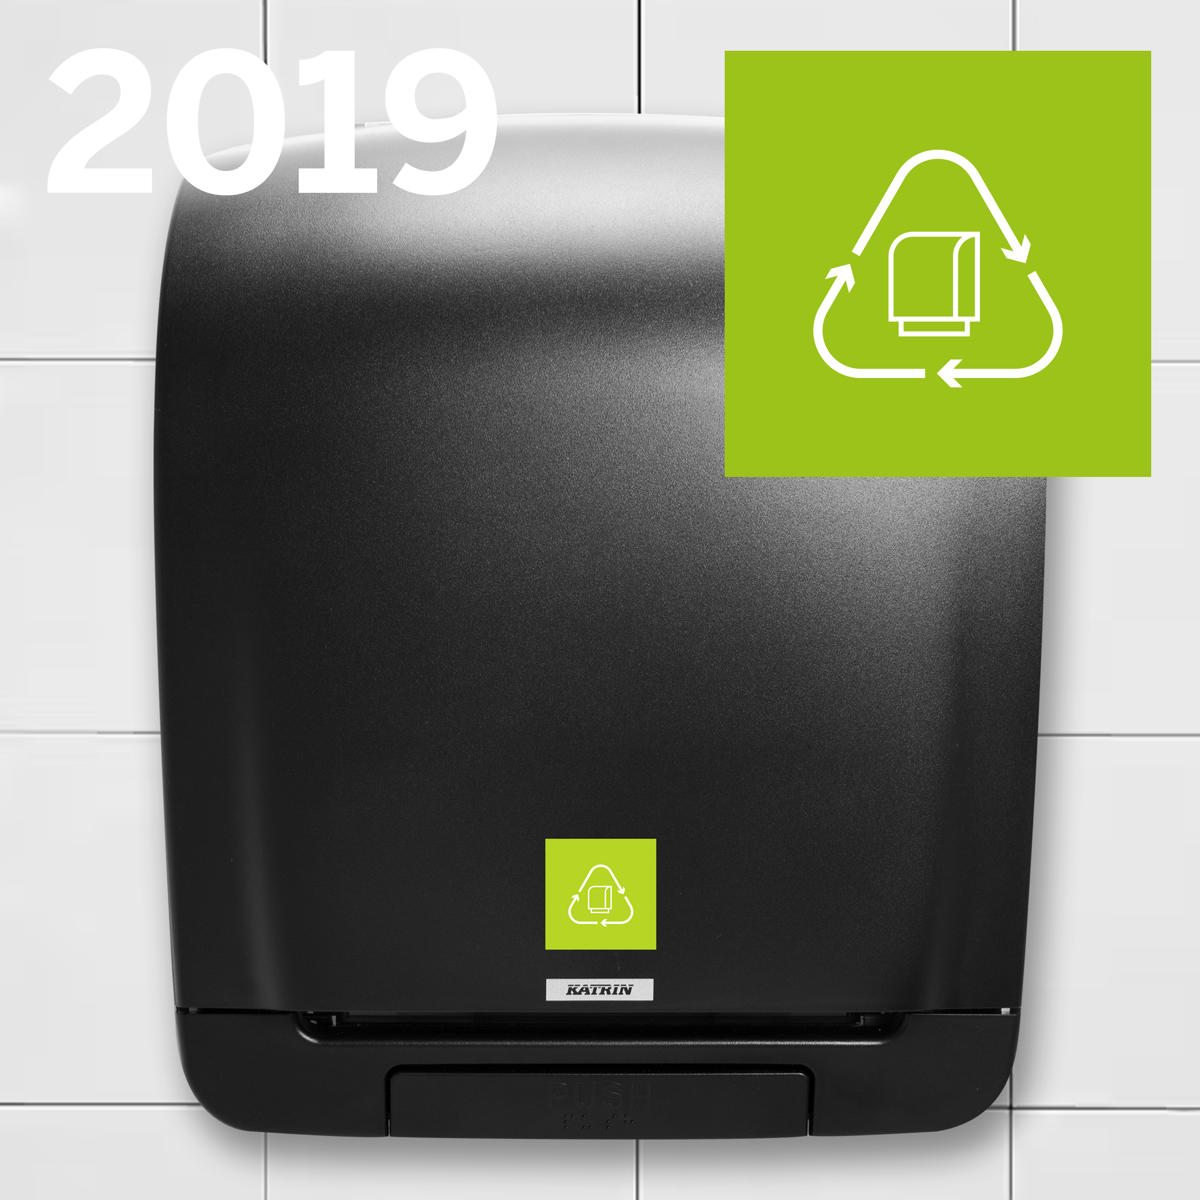 Recycled plastic in our black dispensers